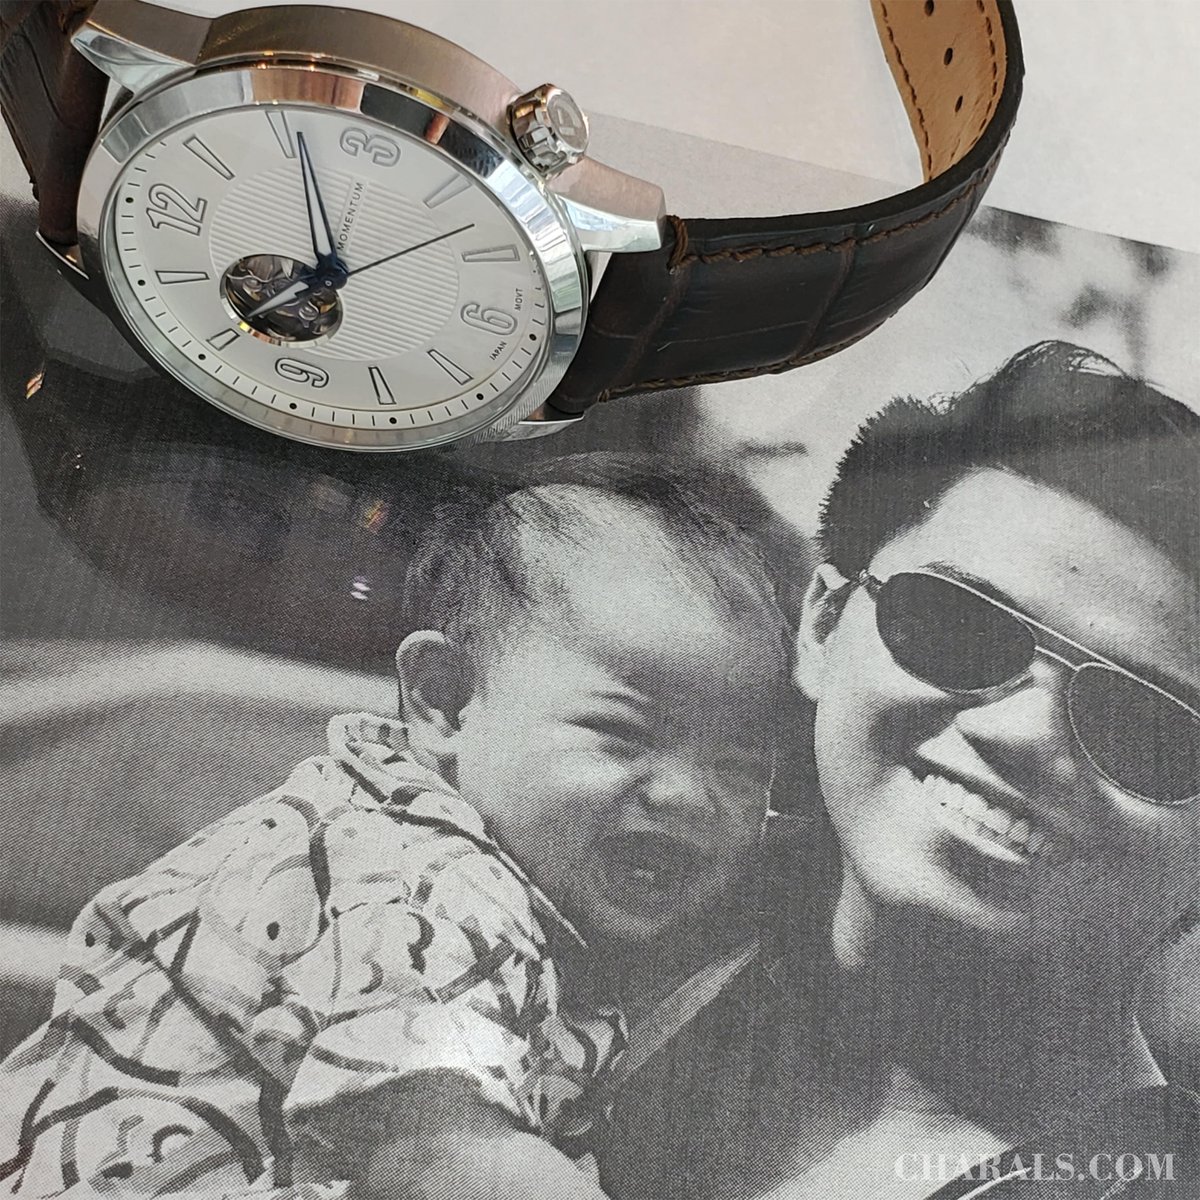 Time is the most precious commodity there is. Spend it wisely. Gift it to the ones who matter most. Happy Father's Day. #fathersday #fathersdaygift #watchgift #nicewatch #gifttime #timeisprecious #vancouverluxurystore #vancouvergiftstore #shoplocalvancouver #yaletown